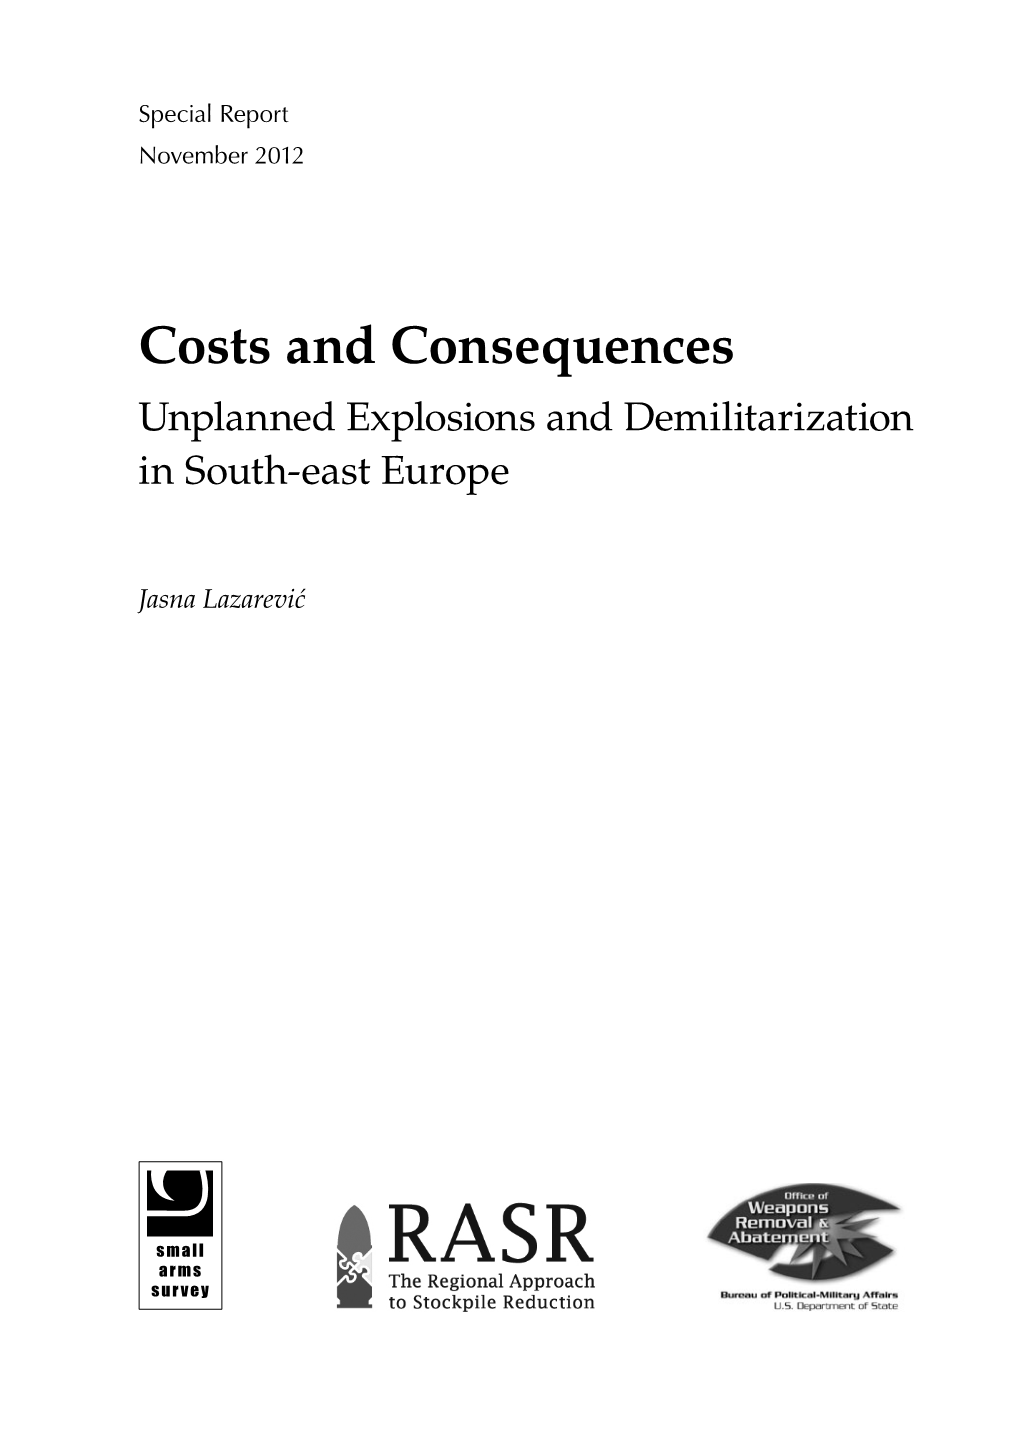 Costs and Consequences: Unplanned Explosions and Demilitarization in South-East Europe